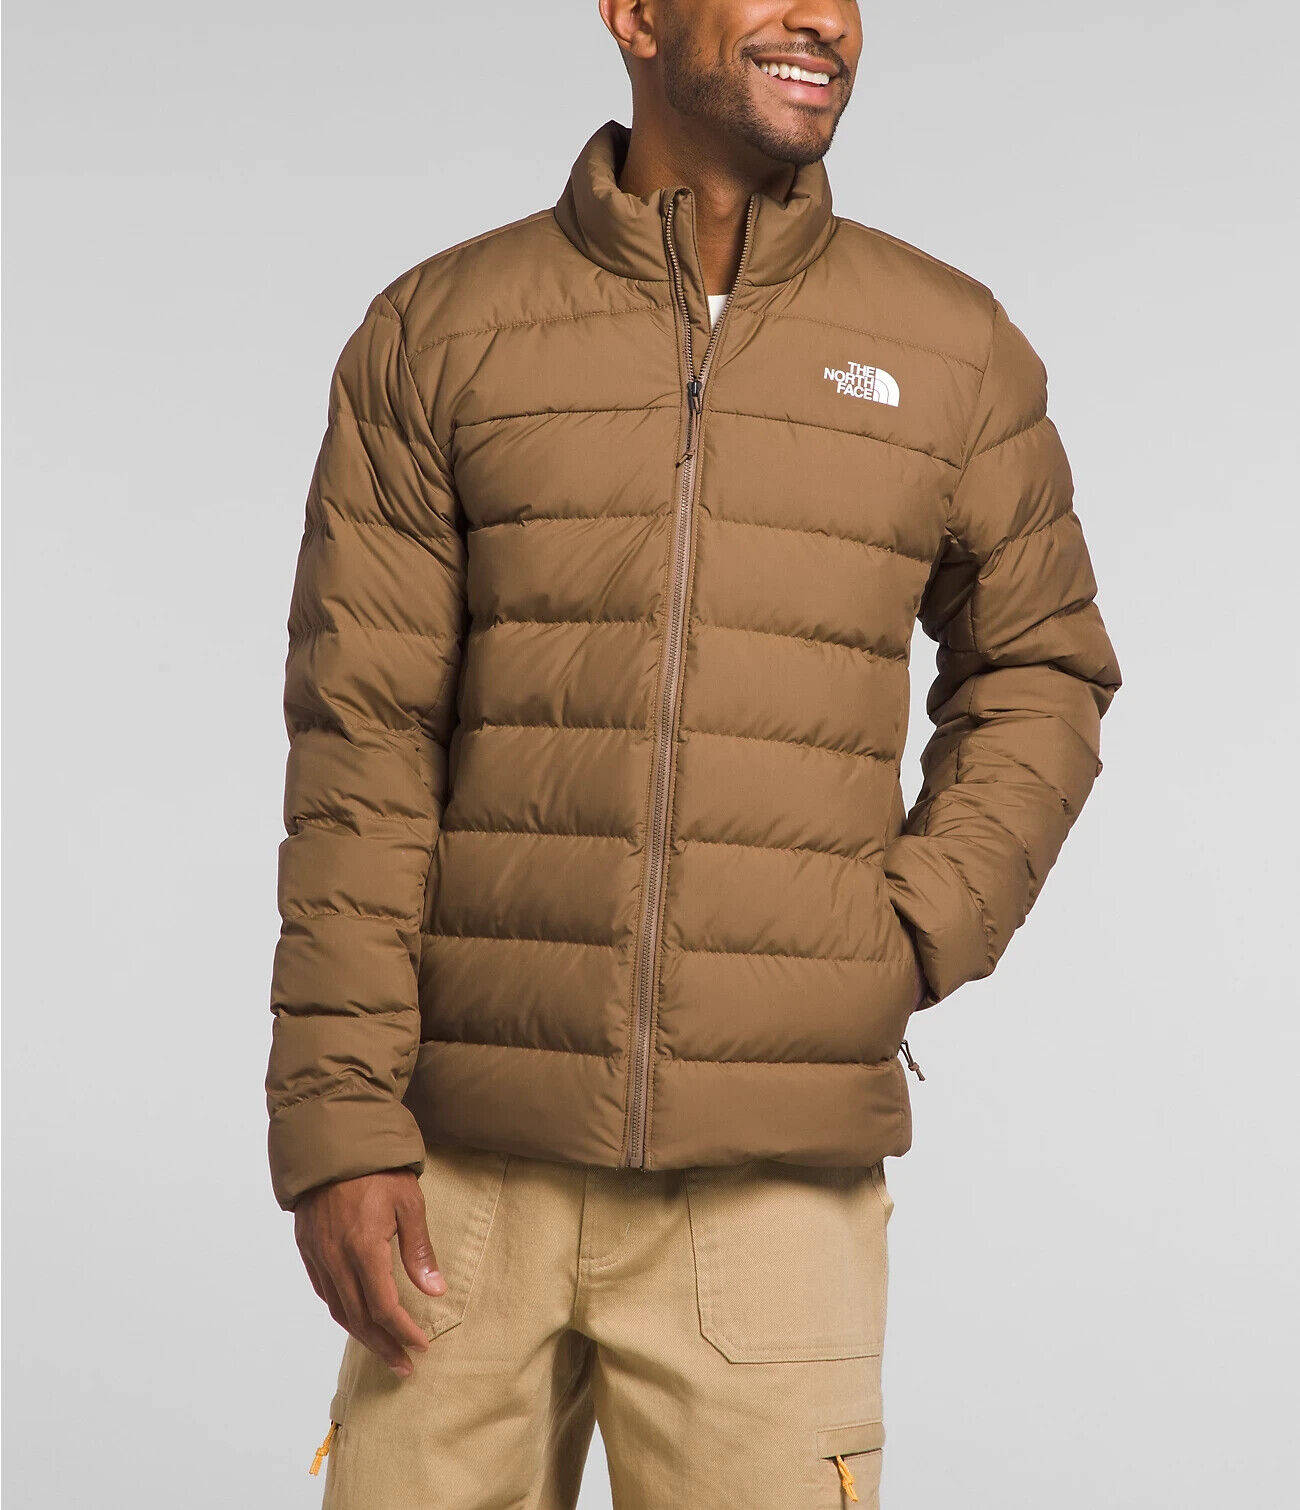 The North Face Mens - Aconcagua 3 Jacket - Utility Brown MEDIUM | FAST SHIP